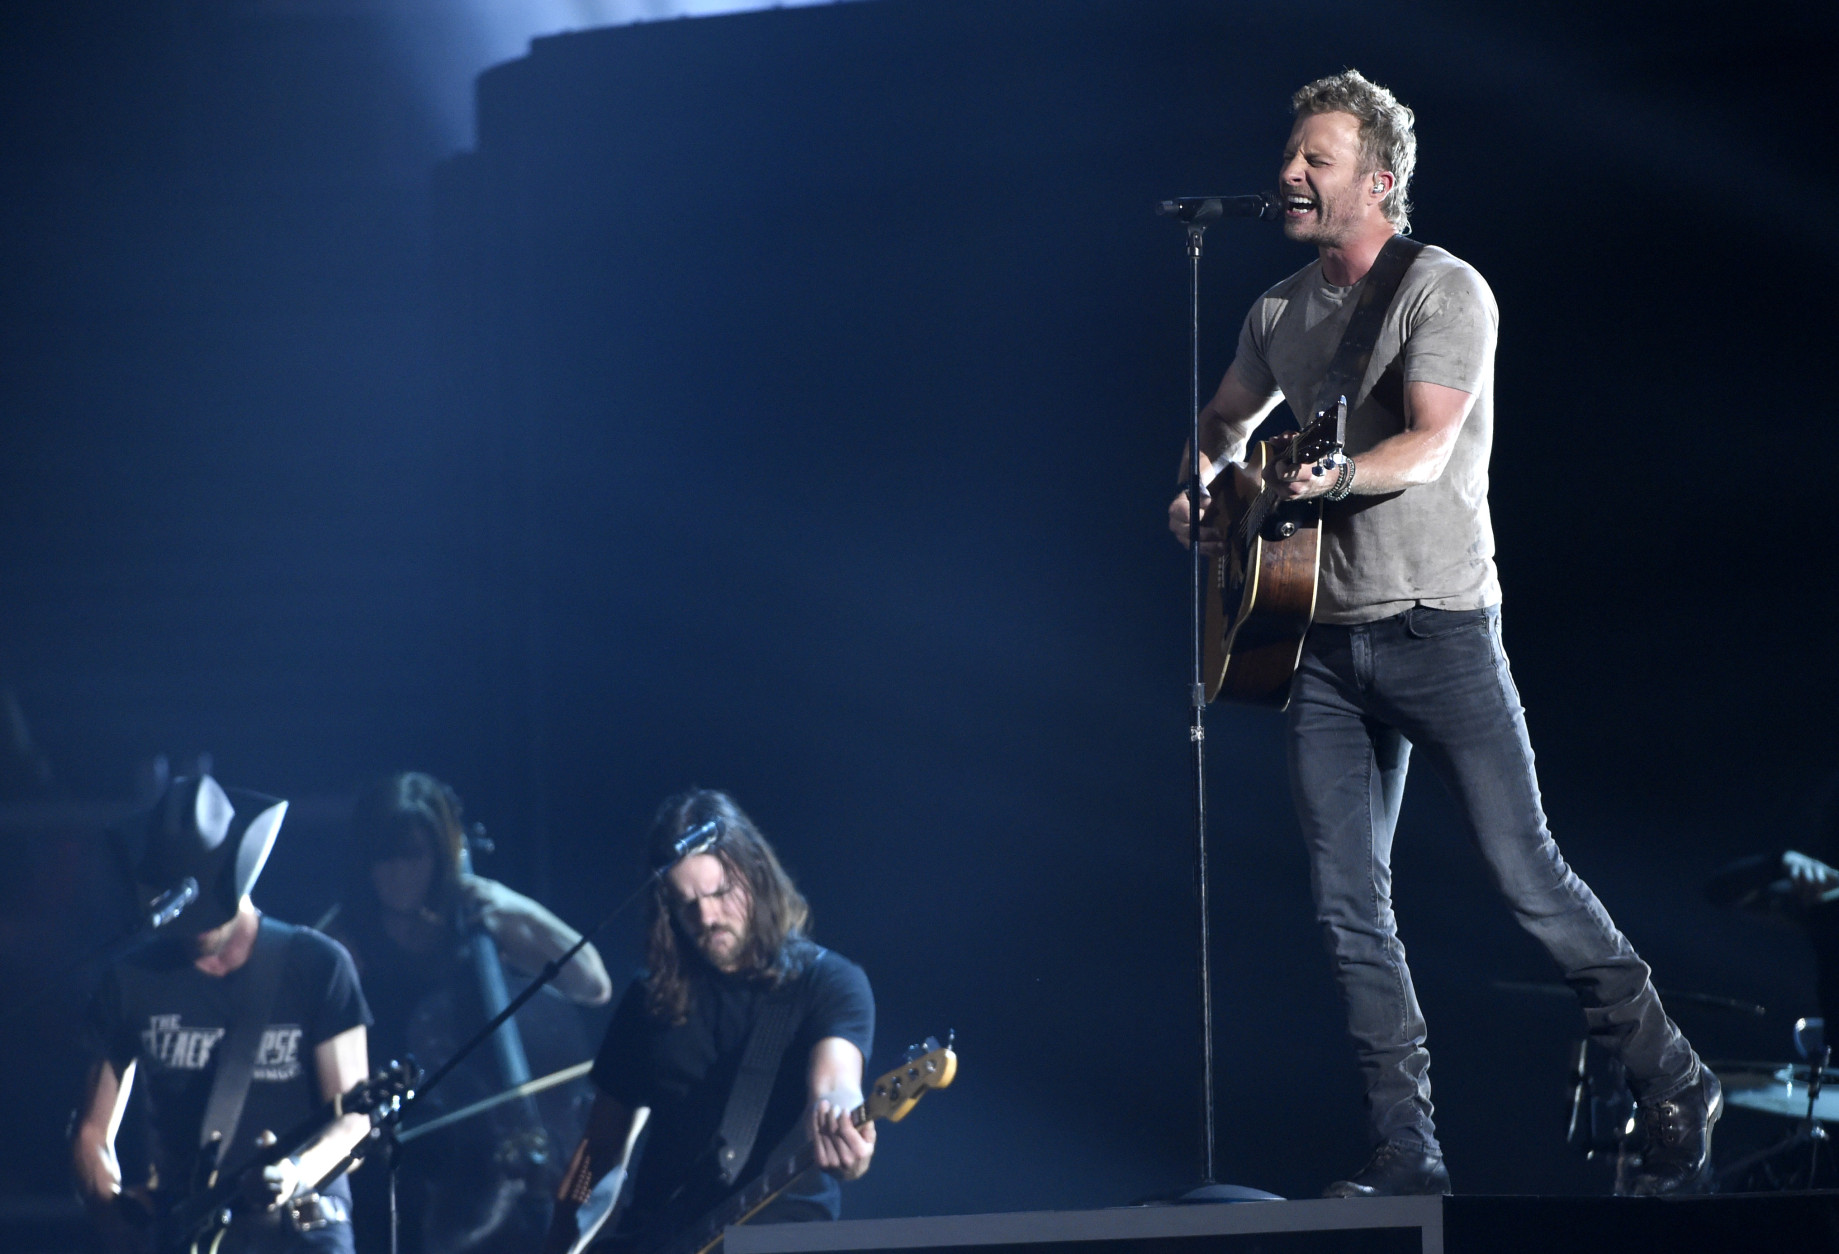 Dierks Bentley performs at the 50th annual Academy of Country Music Awards at AT&amp;T Stadium on Sunday, April 19, 2015, in Arlington, Texas. (Photo by Chris Pizzello/Invision/AP)